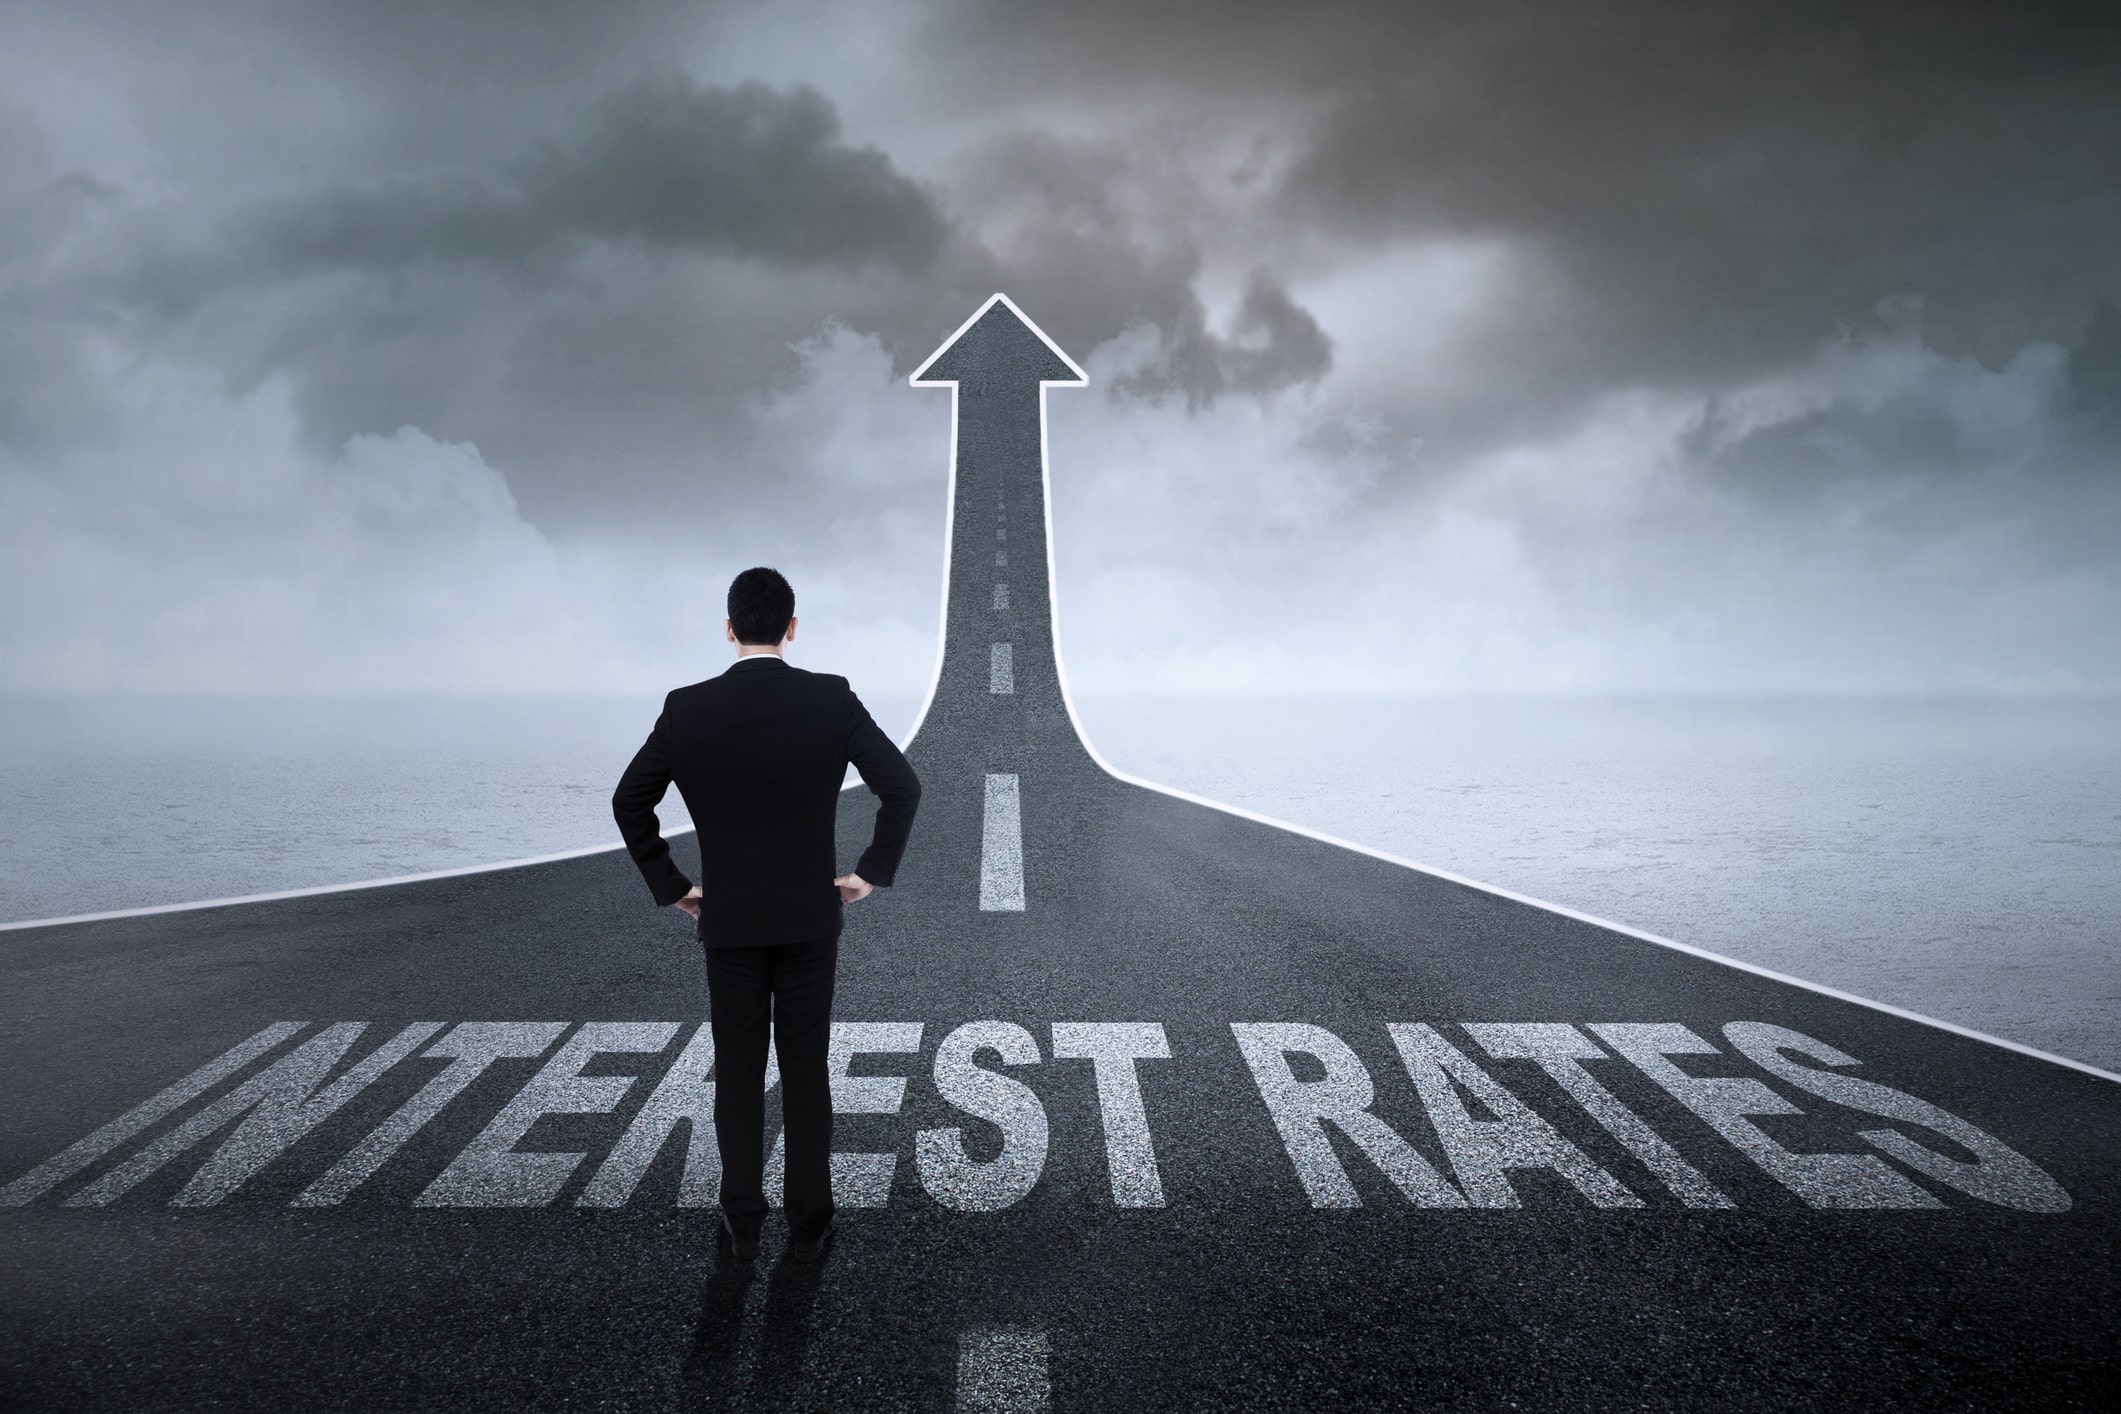 Interest rates, inflation and infrastructure: Interest rate policy can make or break markets